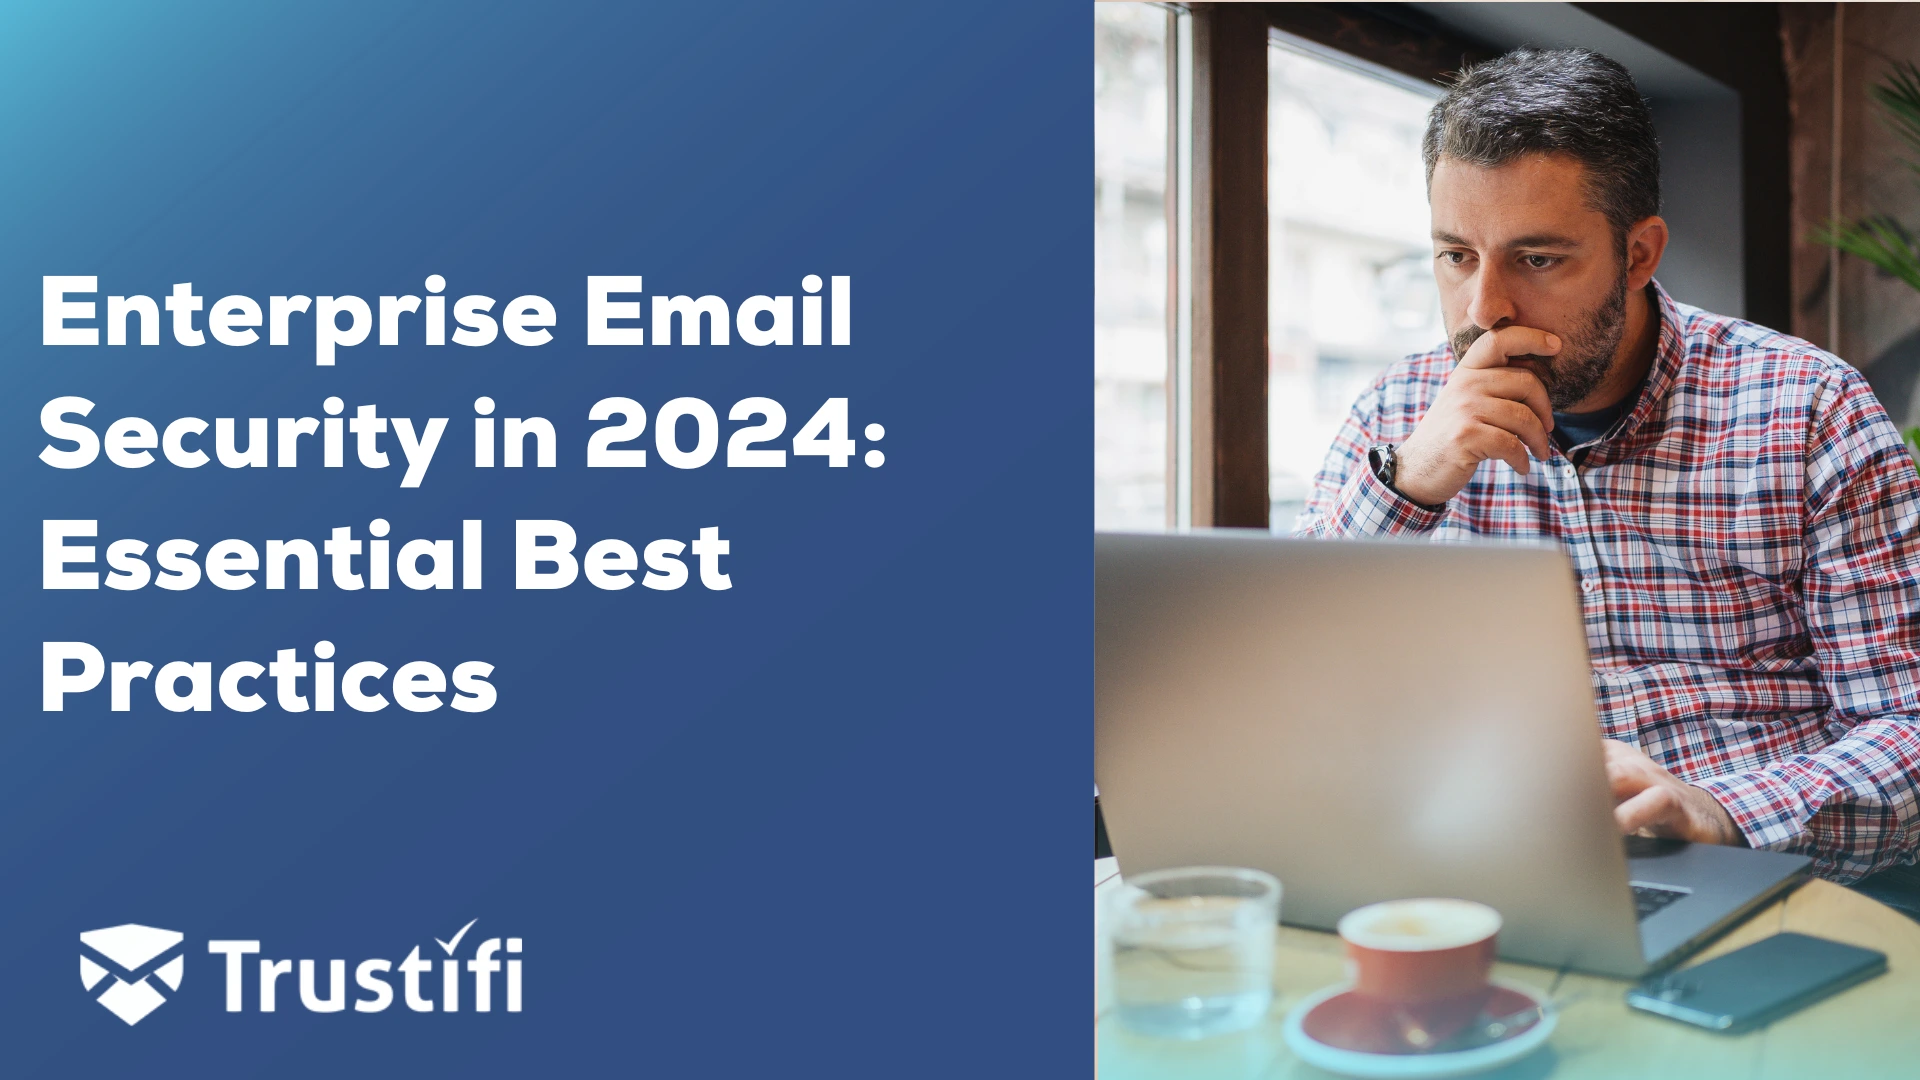 Enterprise Email Security in 2024: Everything you Need to Know